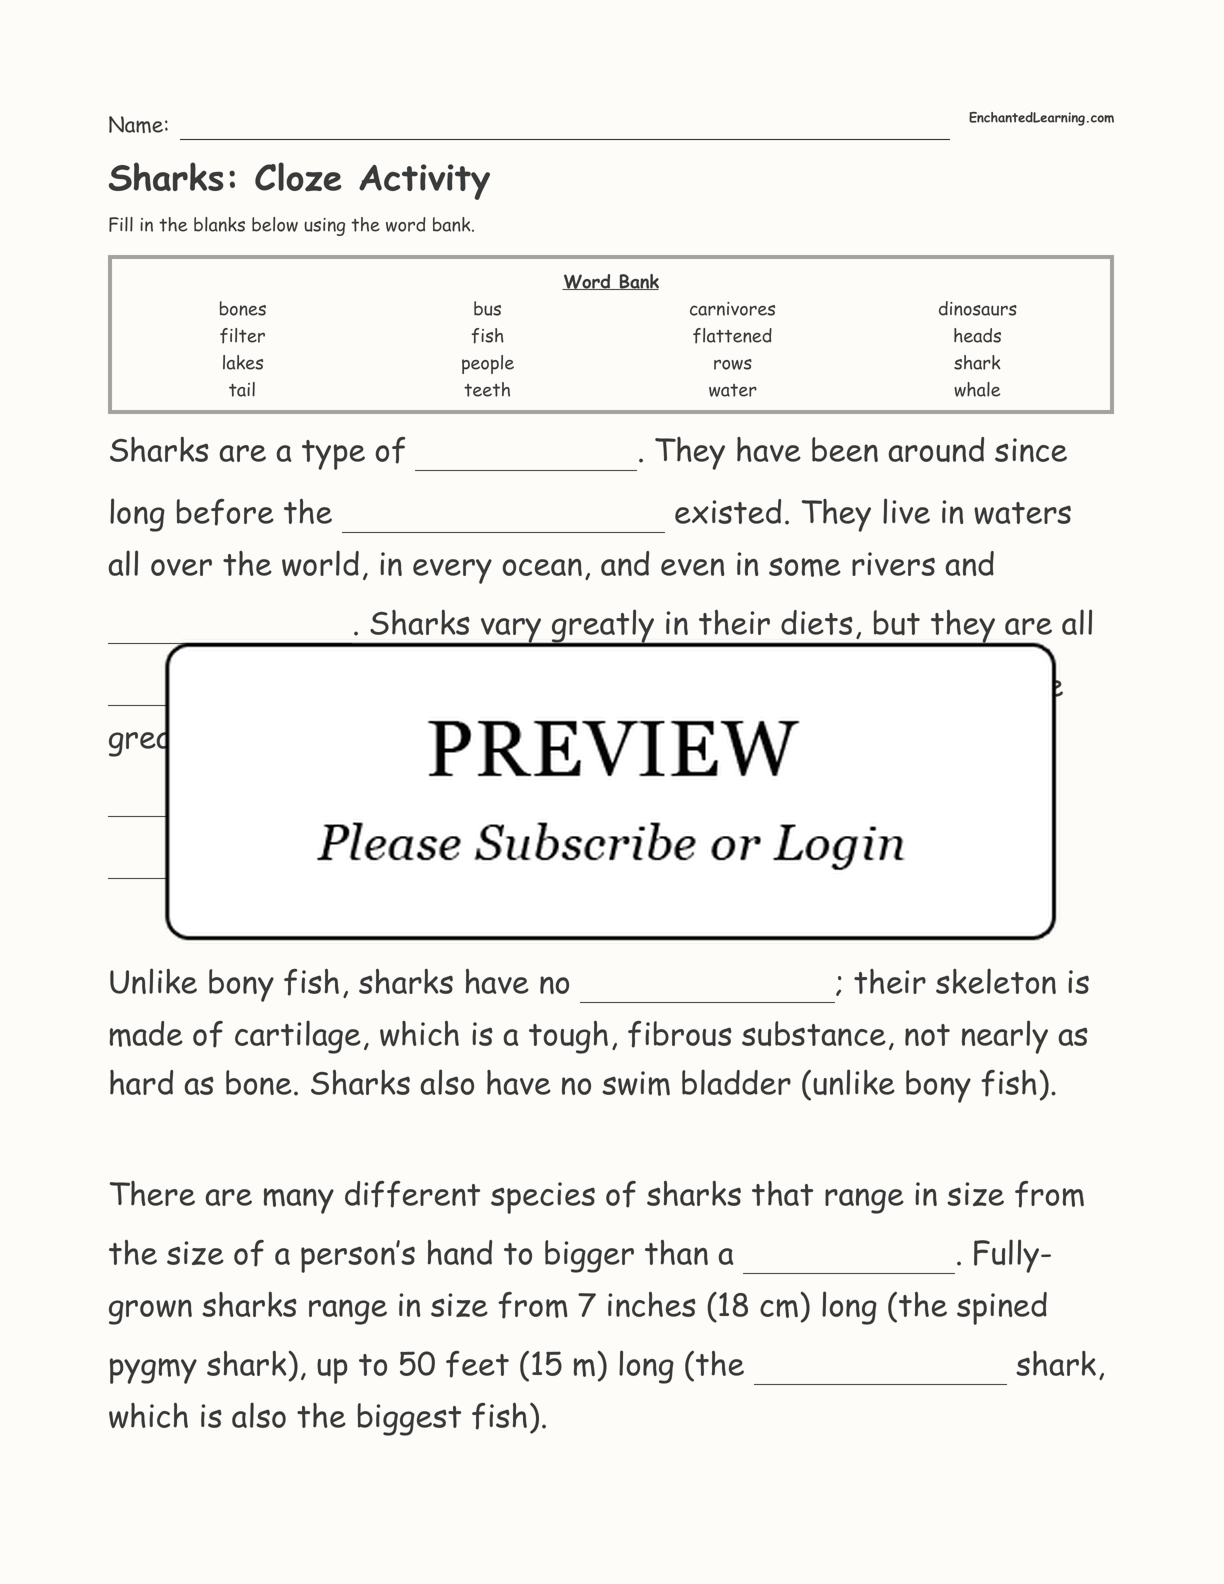 Sharks: Cloze Activity interactive worksheet page 1